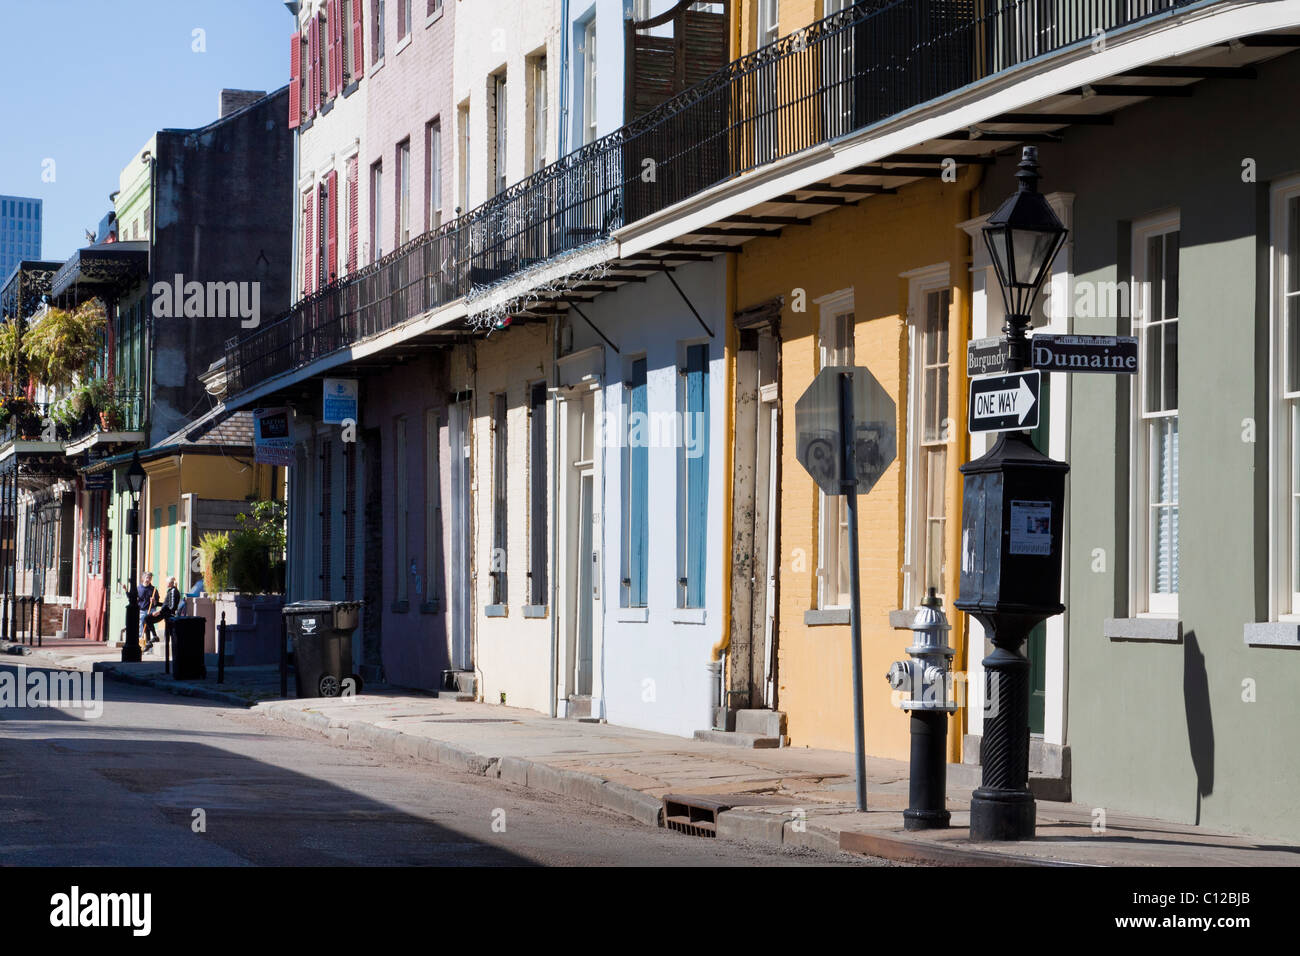 Row of colorful Creole townhouses at Burgundy and Dumaine Street in the French Quarter of New Orleans, Louisiana Stock Photo